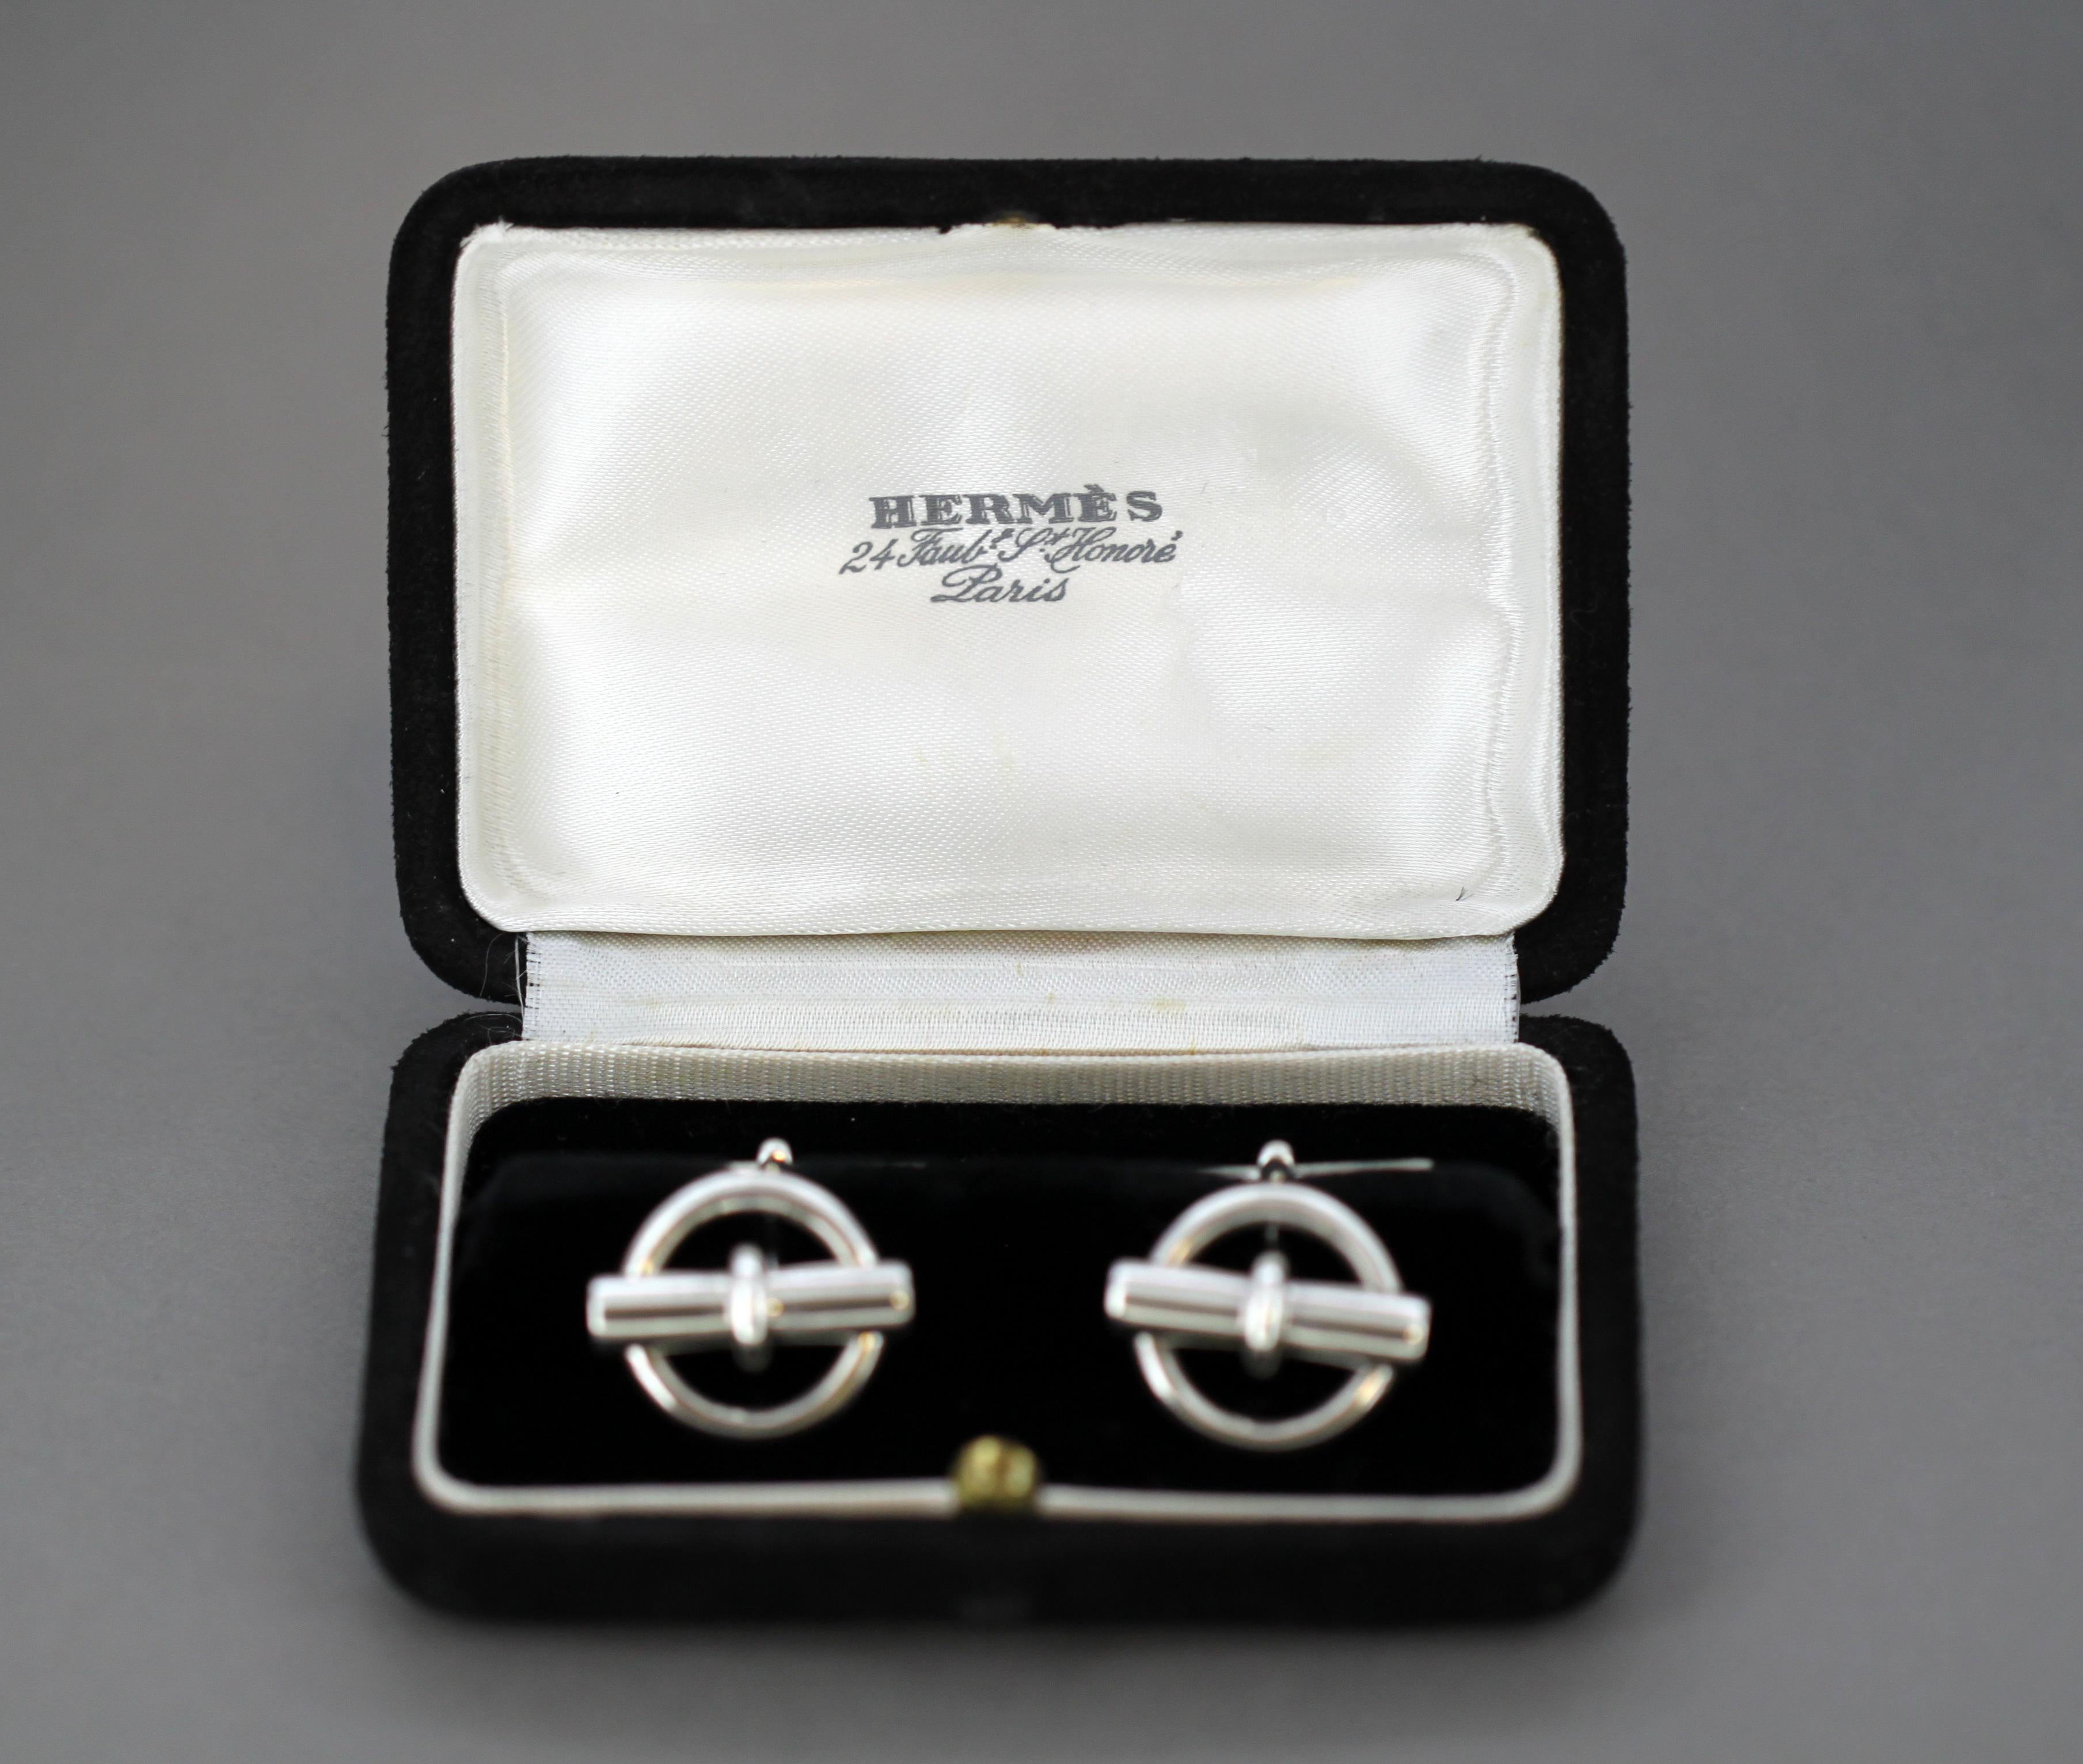 Silver mens cufflinks
Designer : Hermés
Made in London 2001
Fully hallmarked.

Dimension - 
Length x Width : 3 x 2.2 cm
Weight : 25 grams

Condition: Cufflinks is pre-owned, has some surface wear from general usage and minor age wear, no damage,